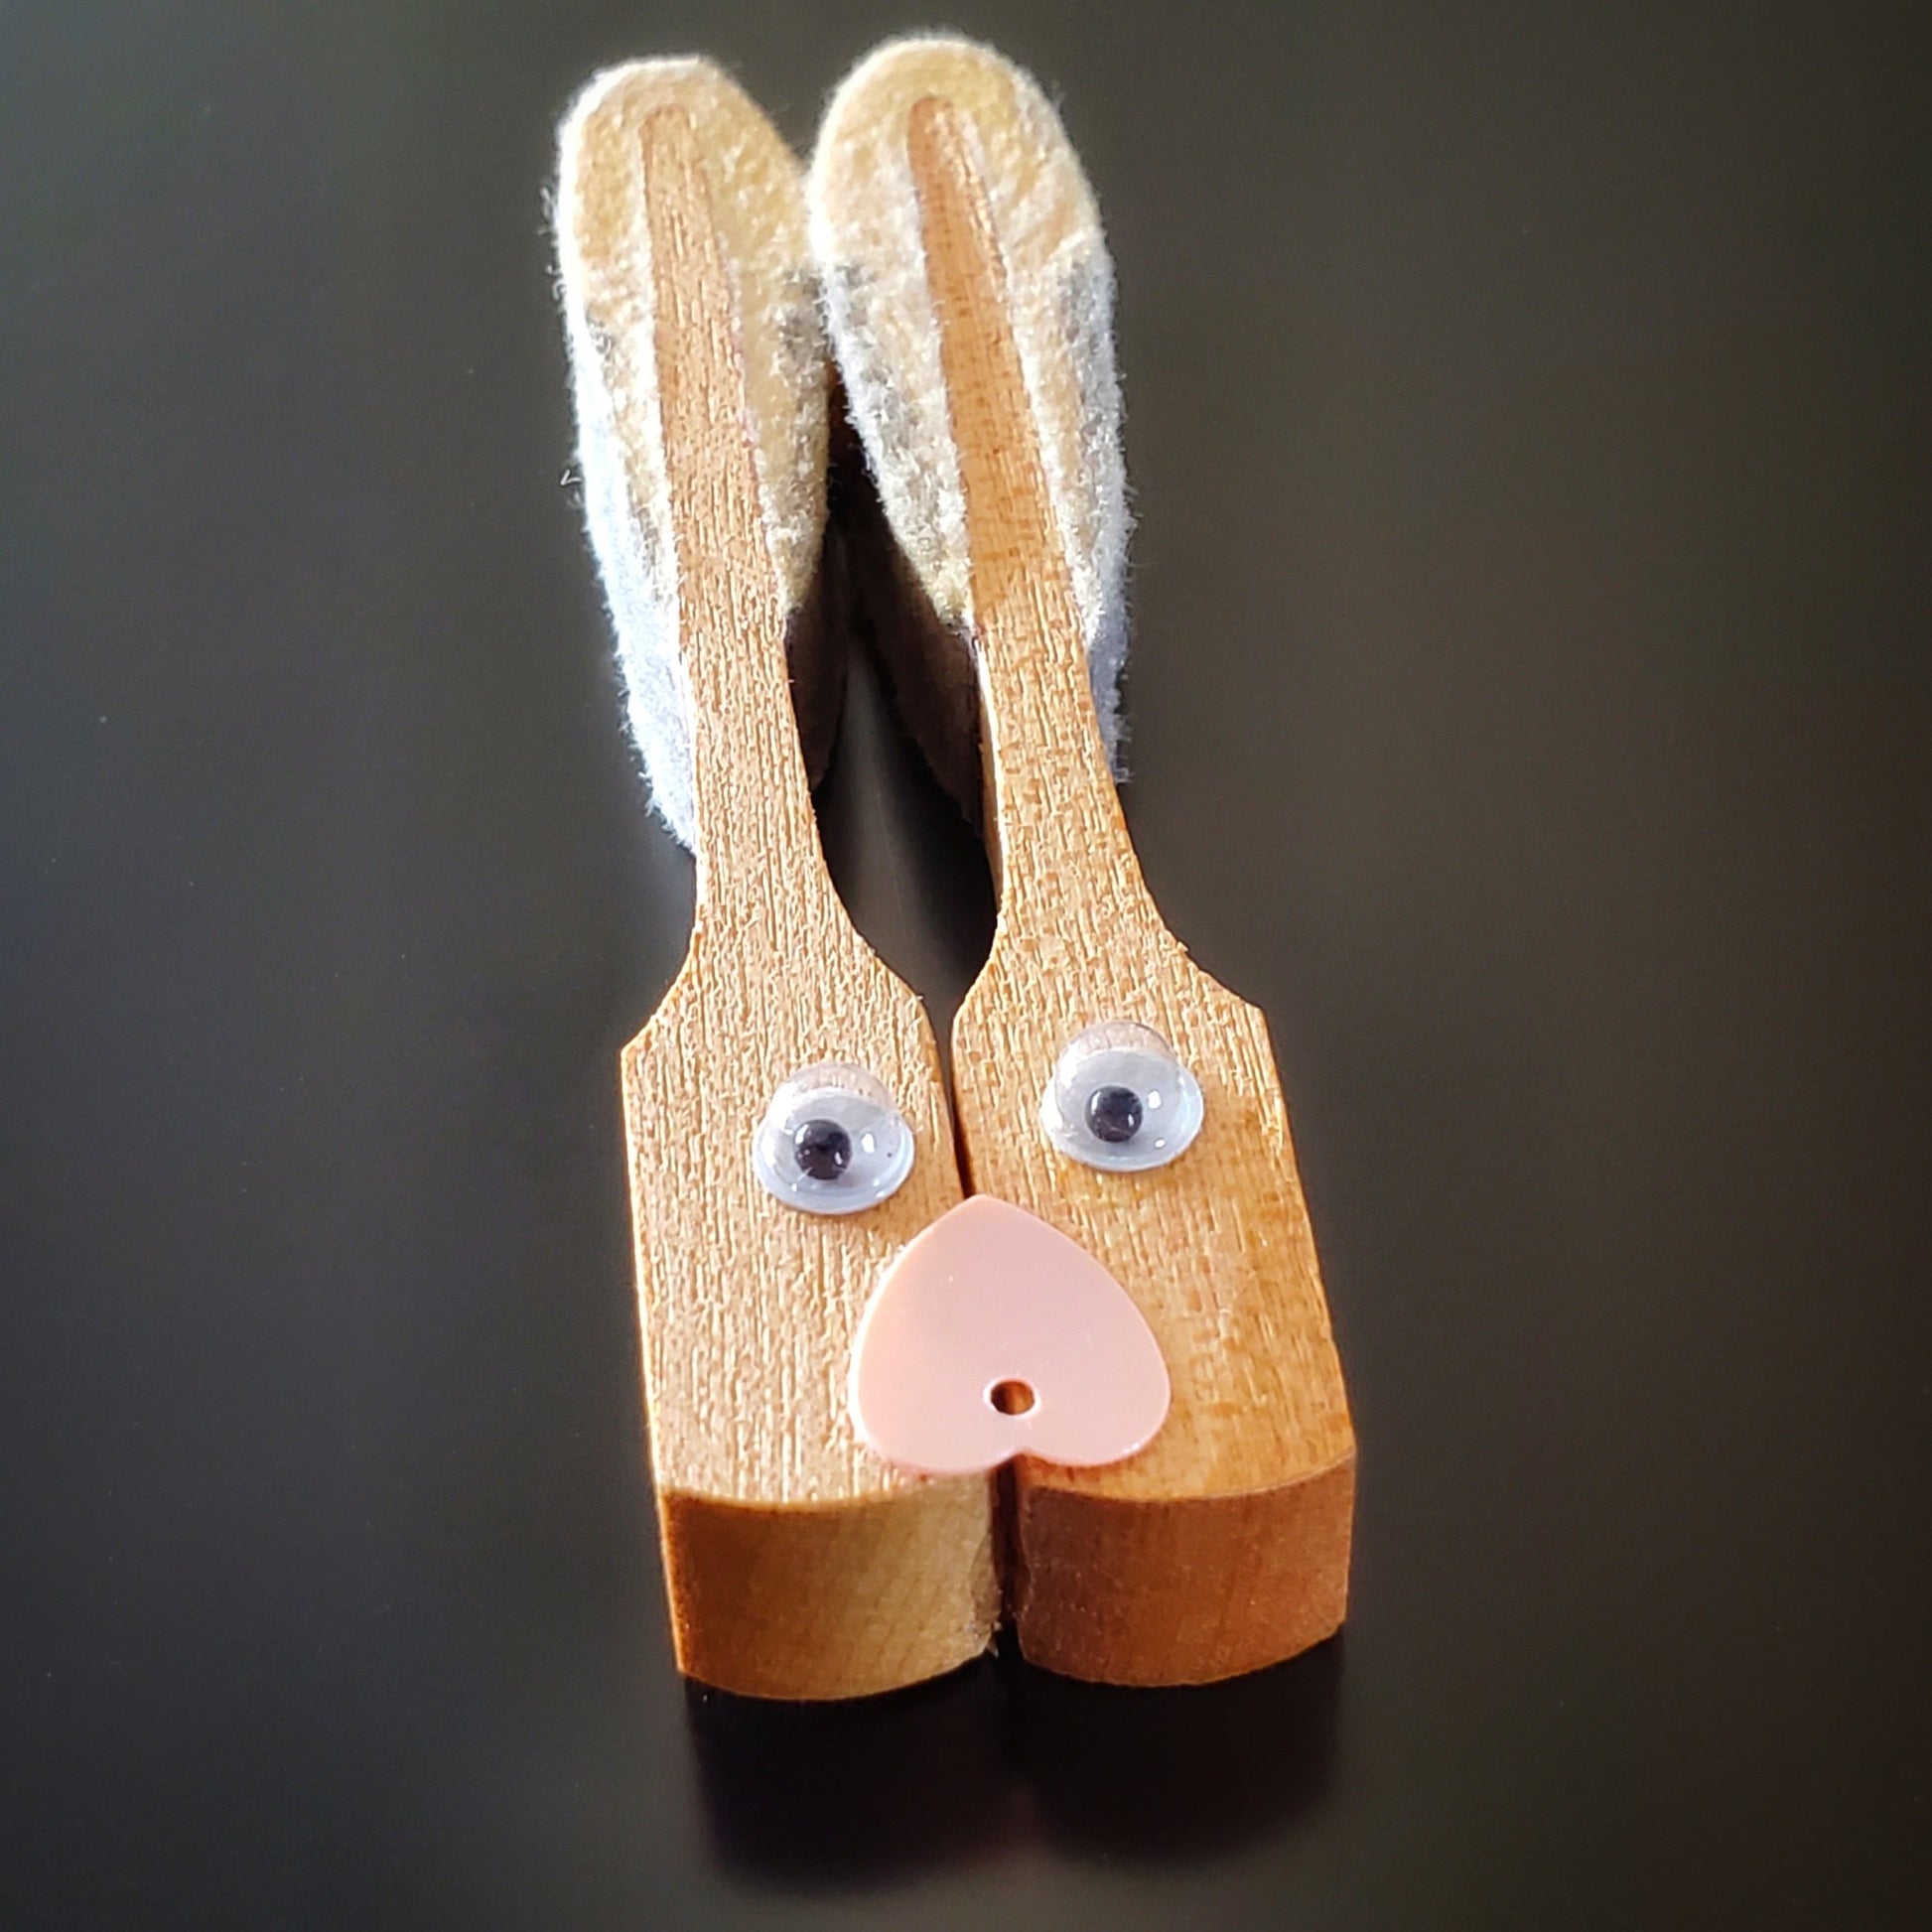 magnet in the shape of a bunny's head - made from 2 upcycled piano hammers